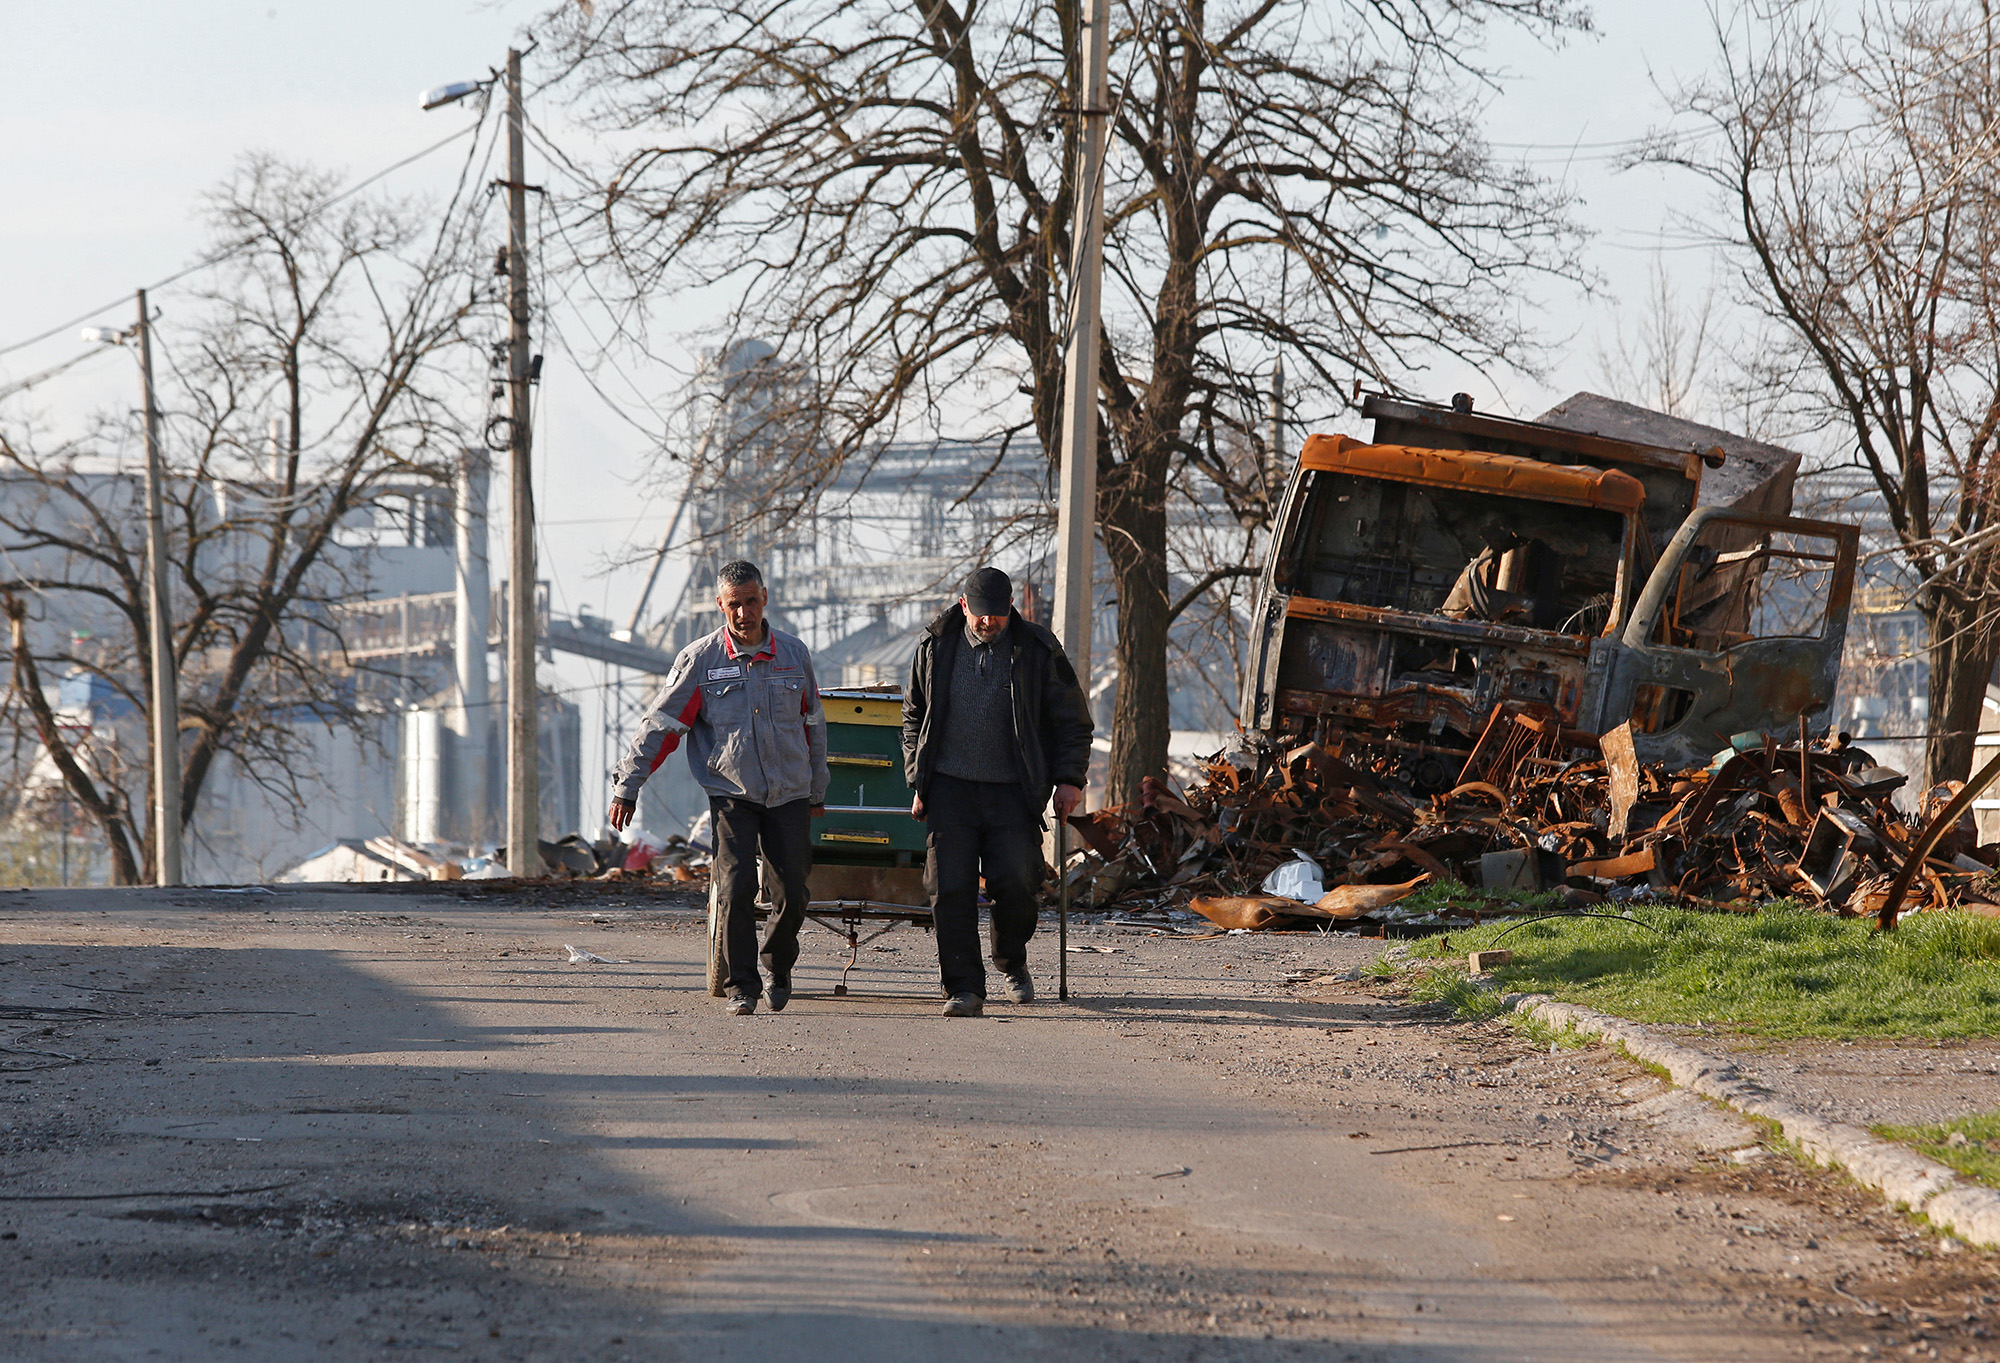 Local residents walk past a destroyed vehicle in the southern port city of Mariupol, Ukraine, on April 20.